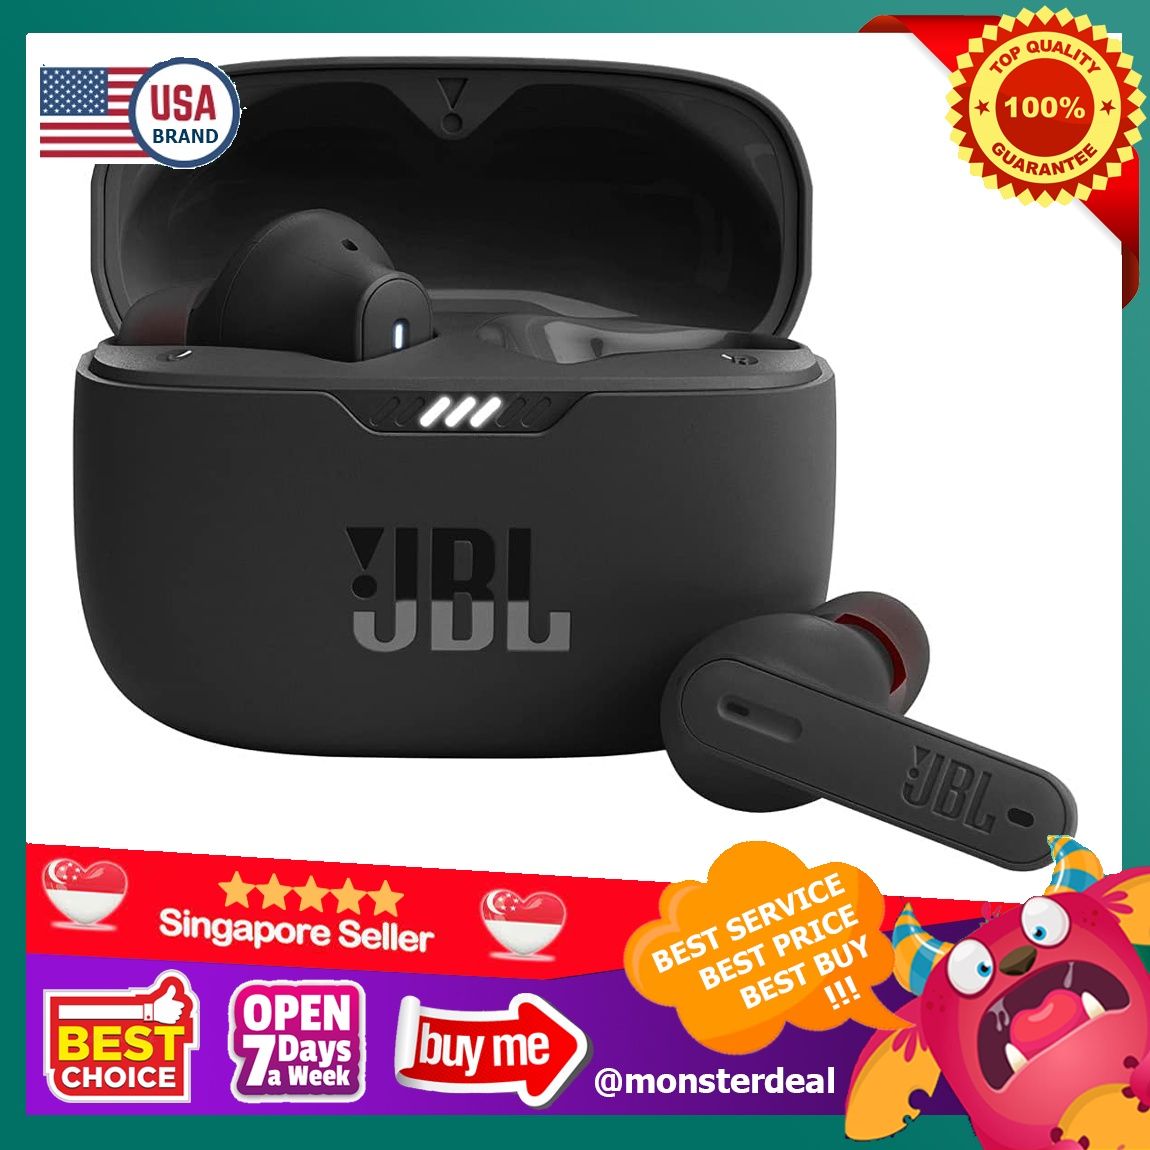 Headphones Carousell JBL Audio, Headsets Black, 230NC (Black) True Noise (Headphones), Headphones In-Ear on Small - & TWS Wireless Cancelling Tune